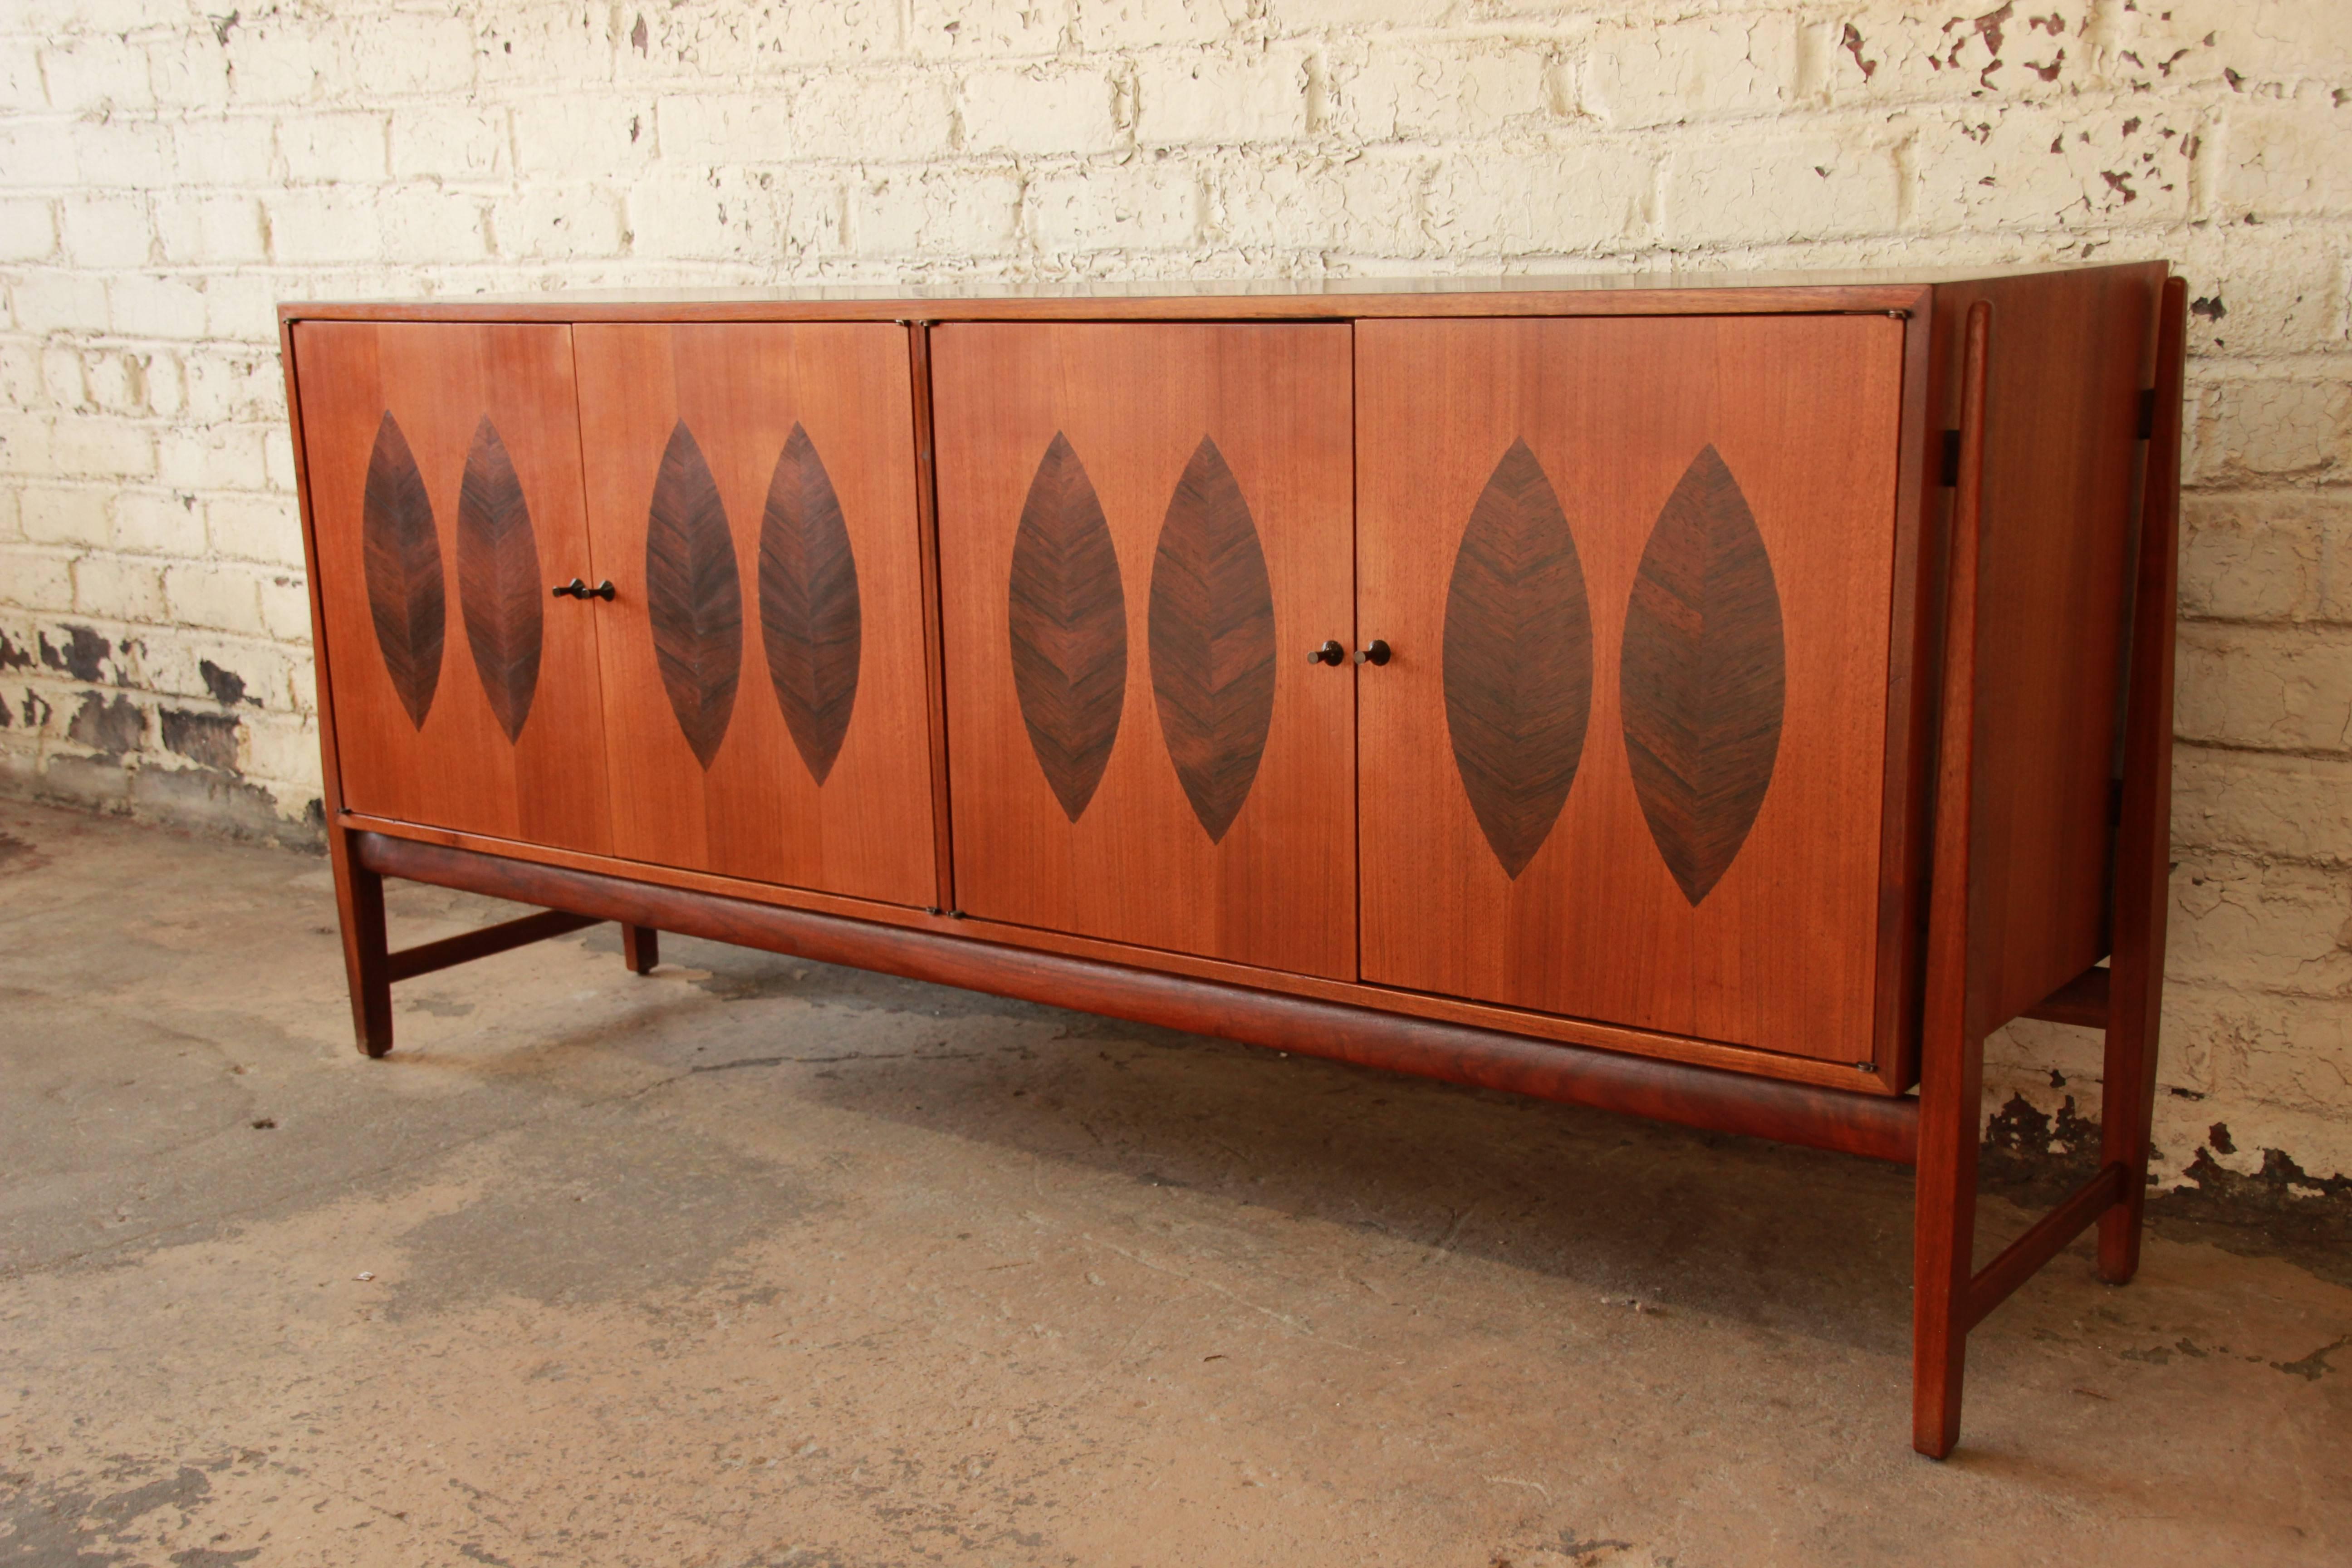 A stunning Mid-Century Modern walnut and inlaid rosewood credenza or sideboard designed by Kipp Stewart for Calvin Furniture. This rare credenza was produced for Calvin's American Design Foundation line, circa 1960. The four-door cabinet features an